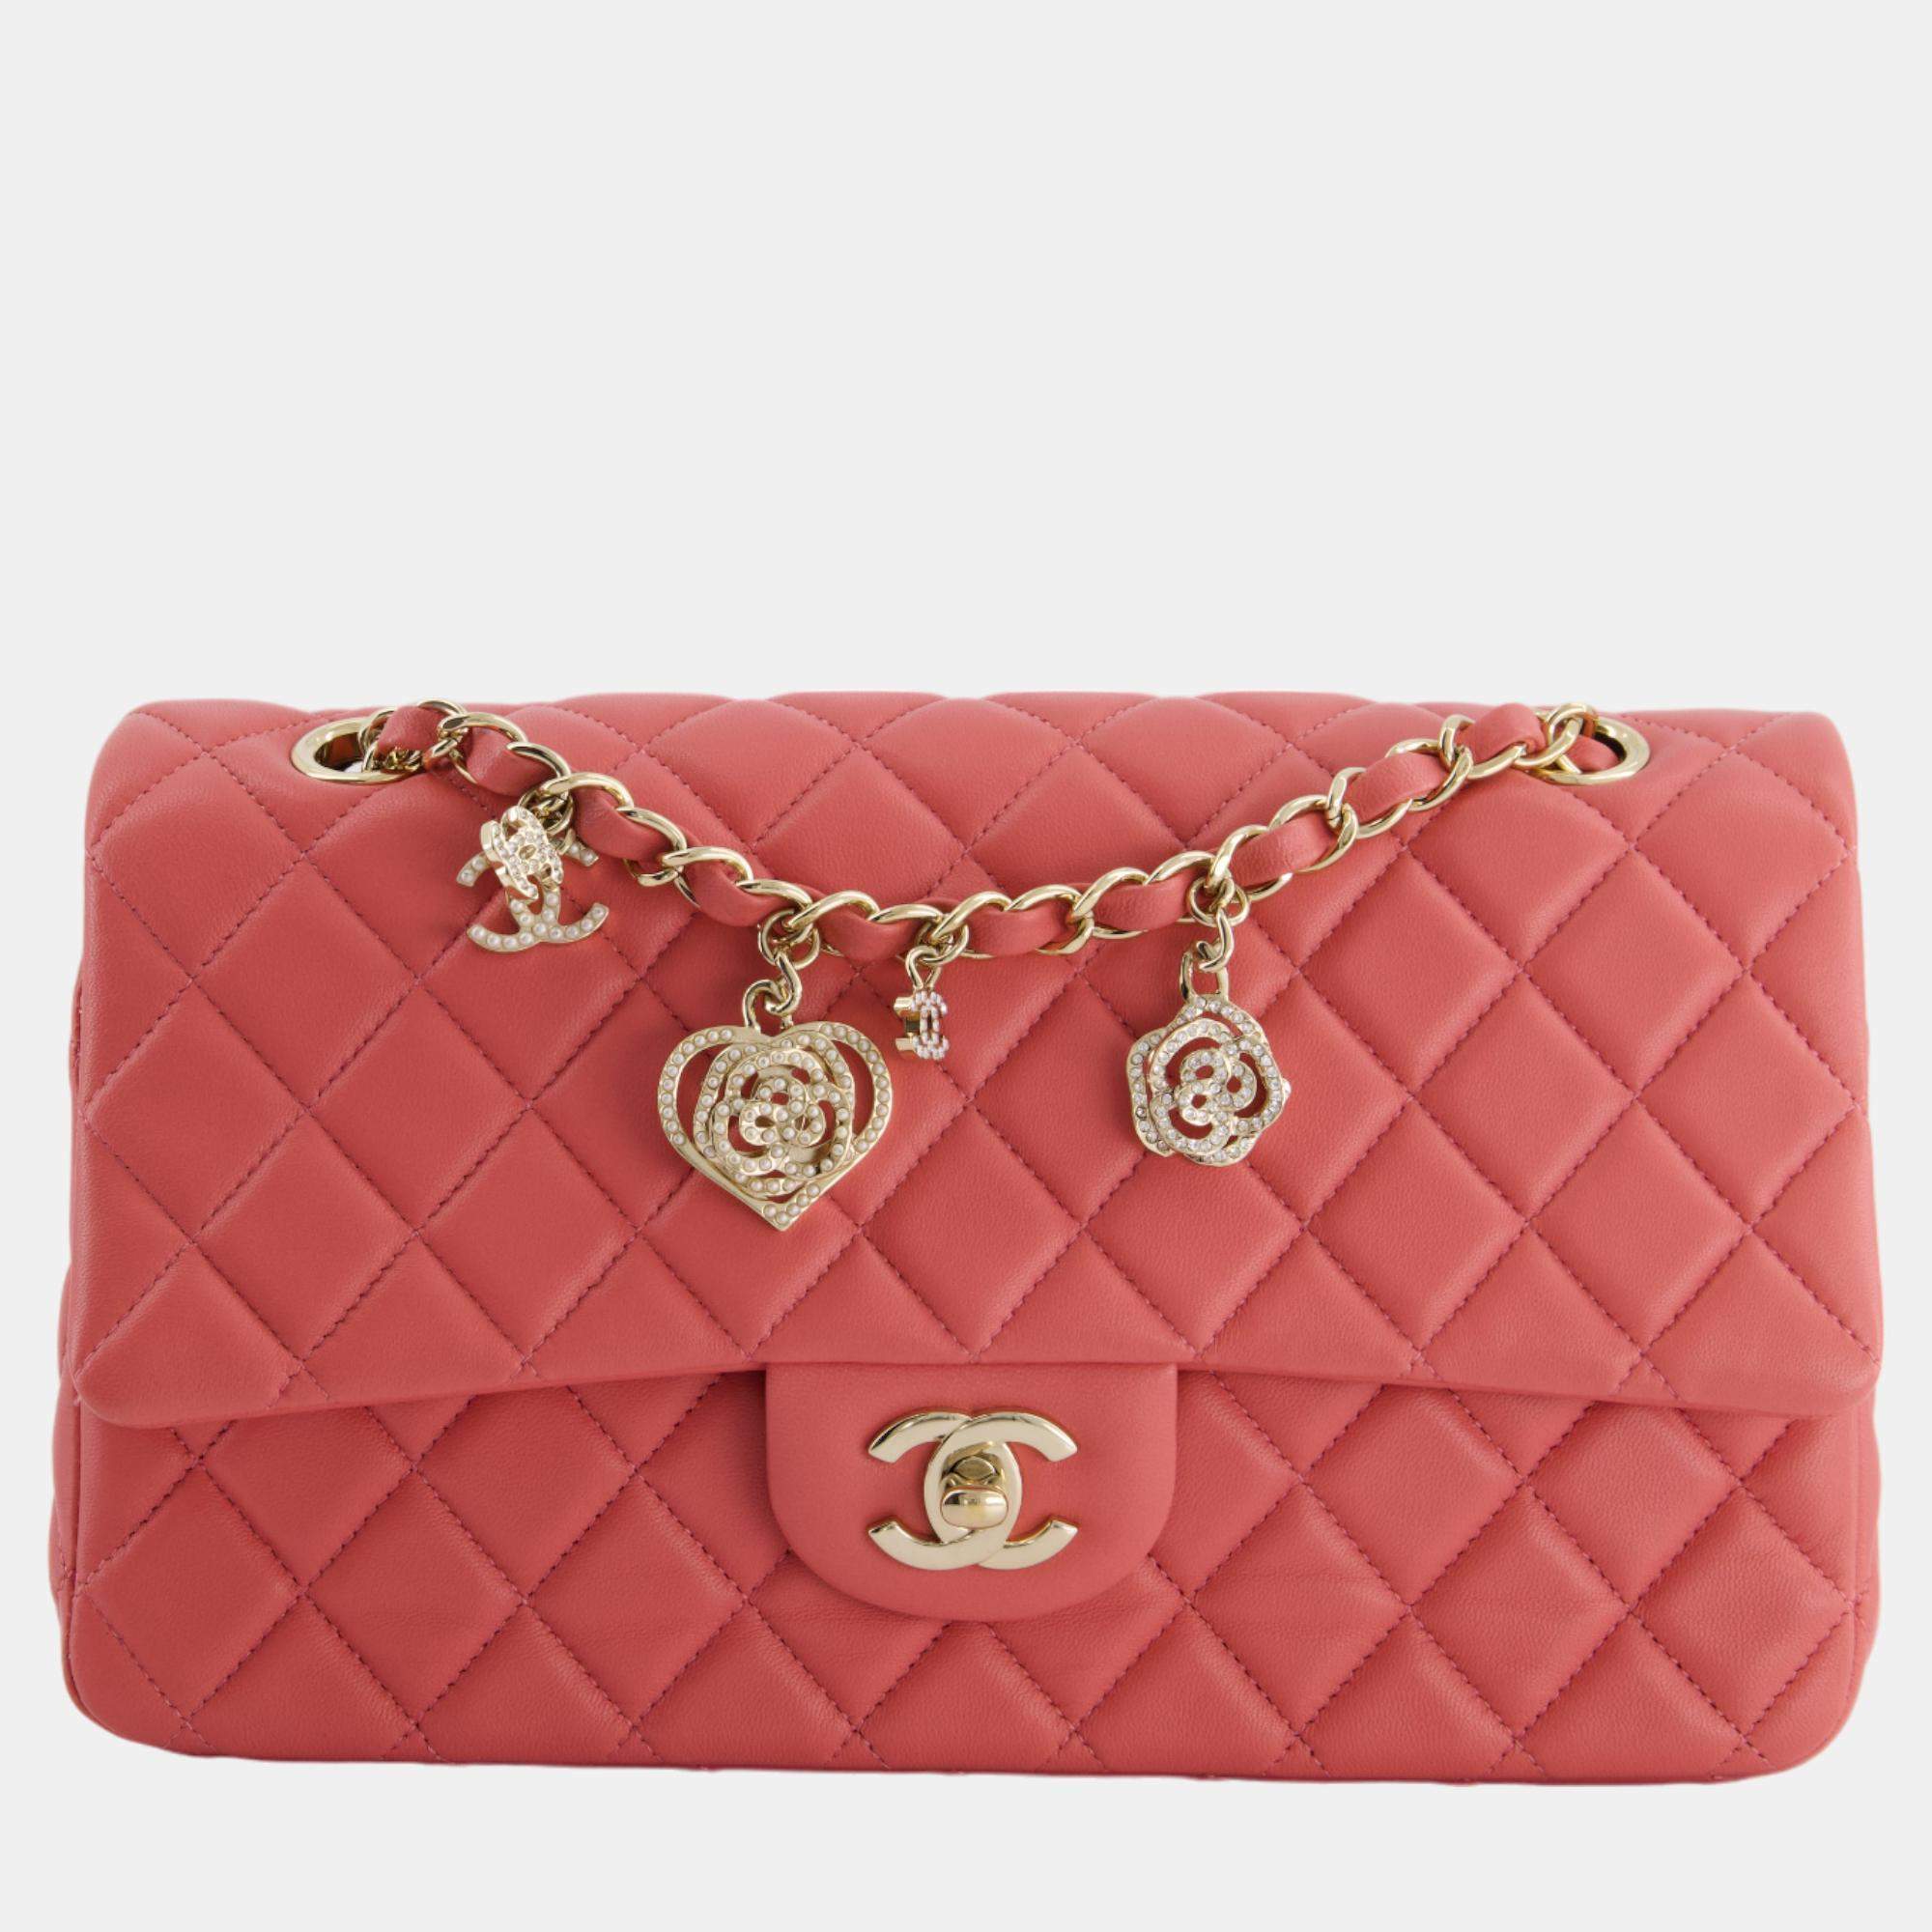 Chanel Pink Medium Single Flap Bag in Lambskin Leather with Champagne Gold Hardware